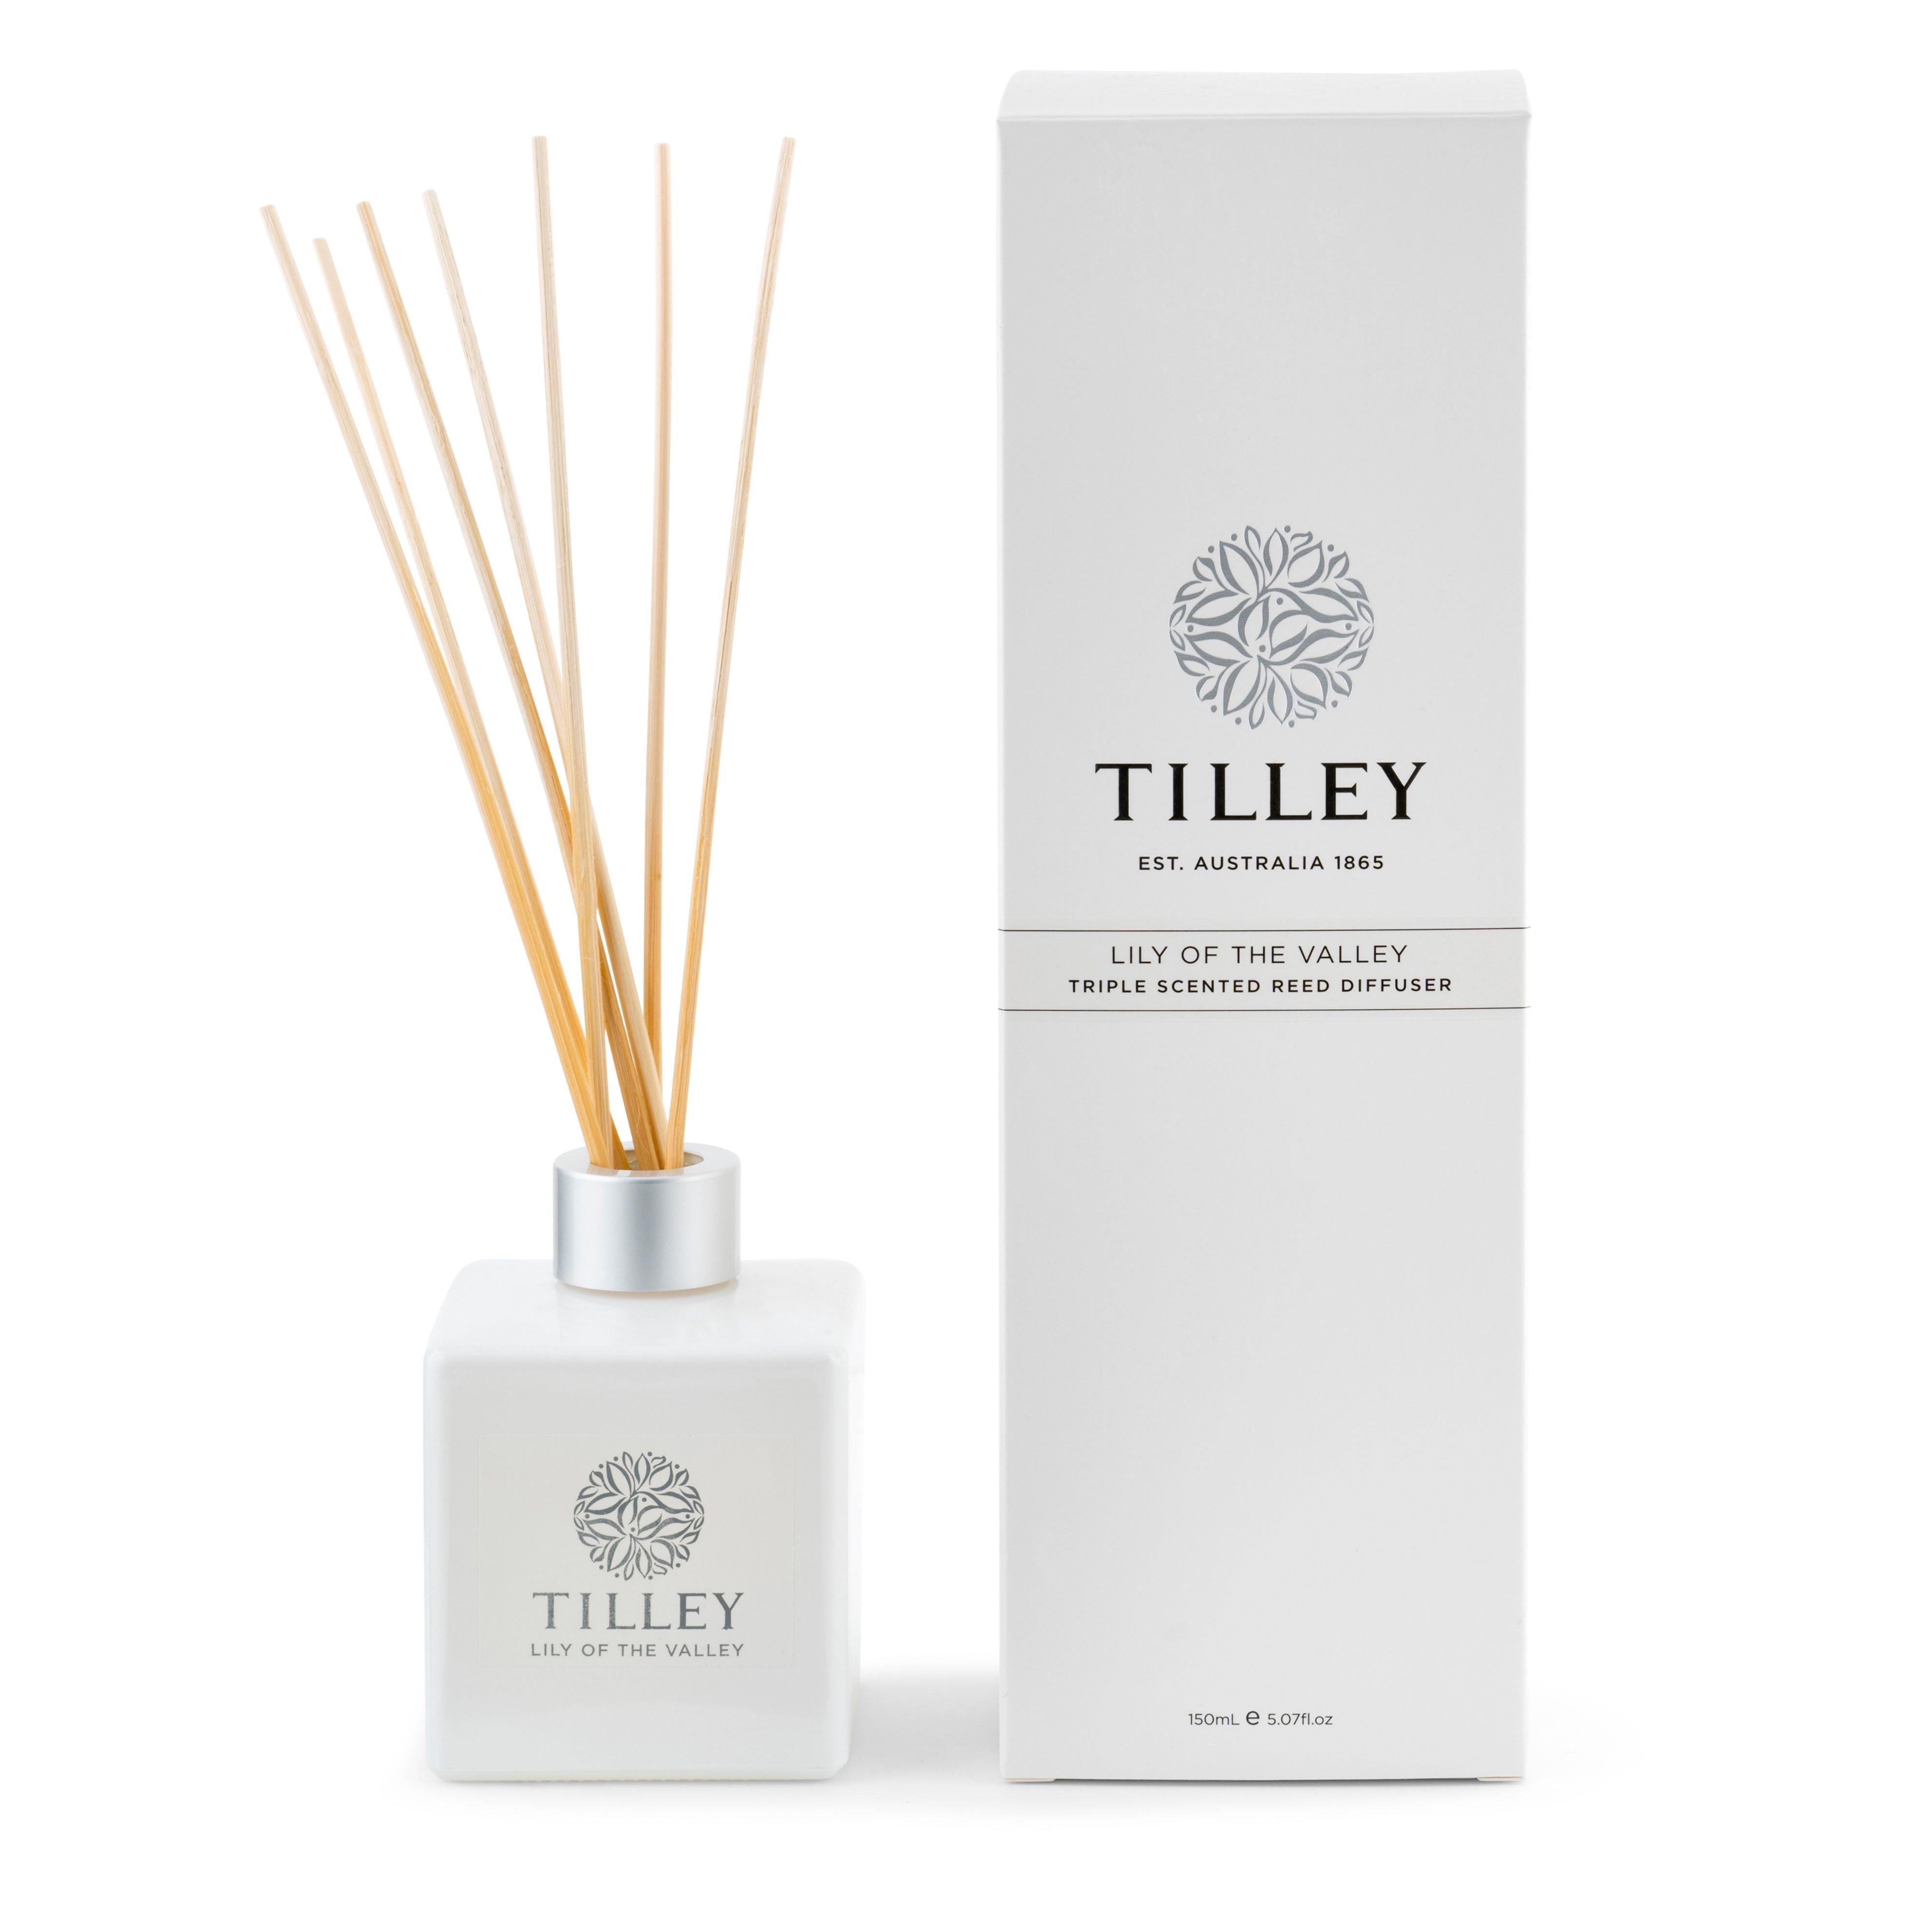 Aromatic Reed Diffuser 150mL - Asst Fragrance-Candles & Fragrance-Tilley-Lily Of The Valley-The Bay Room